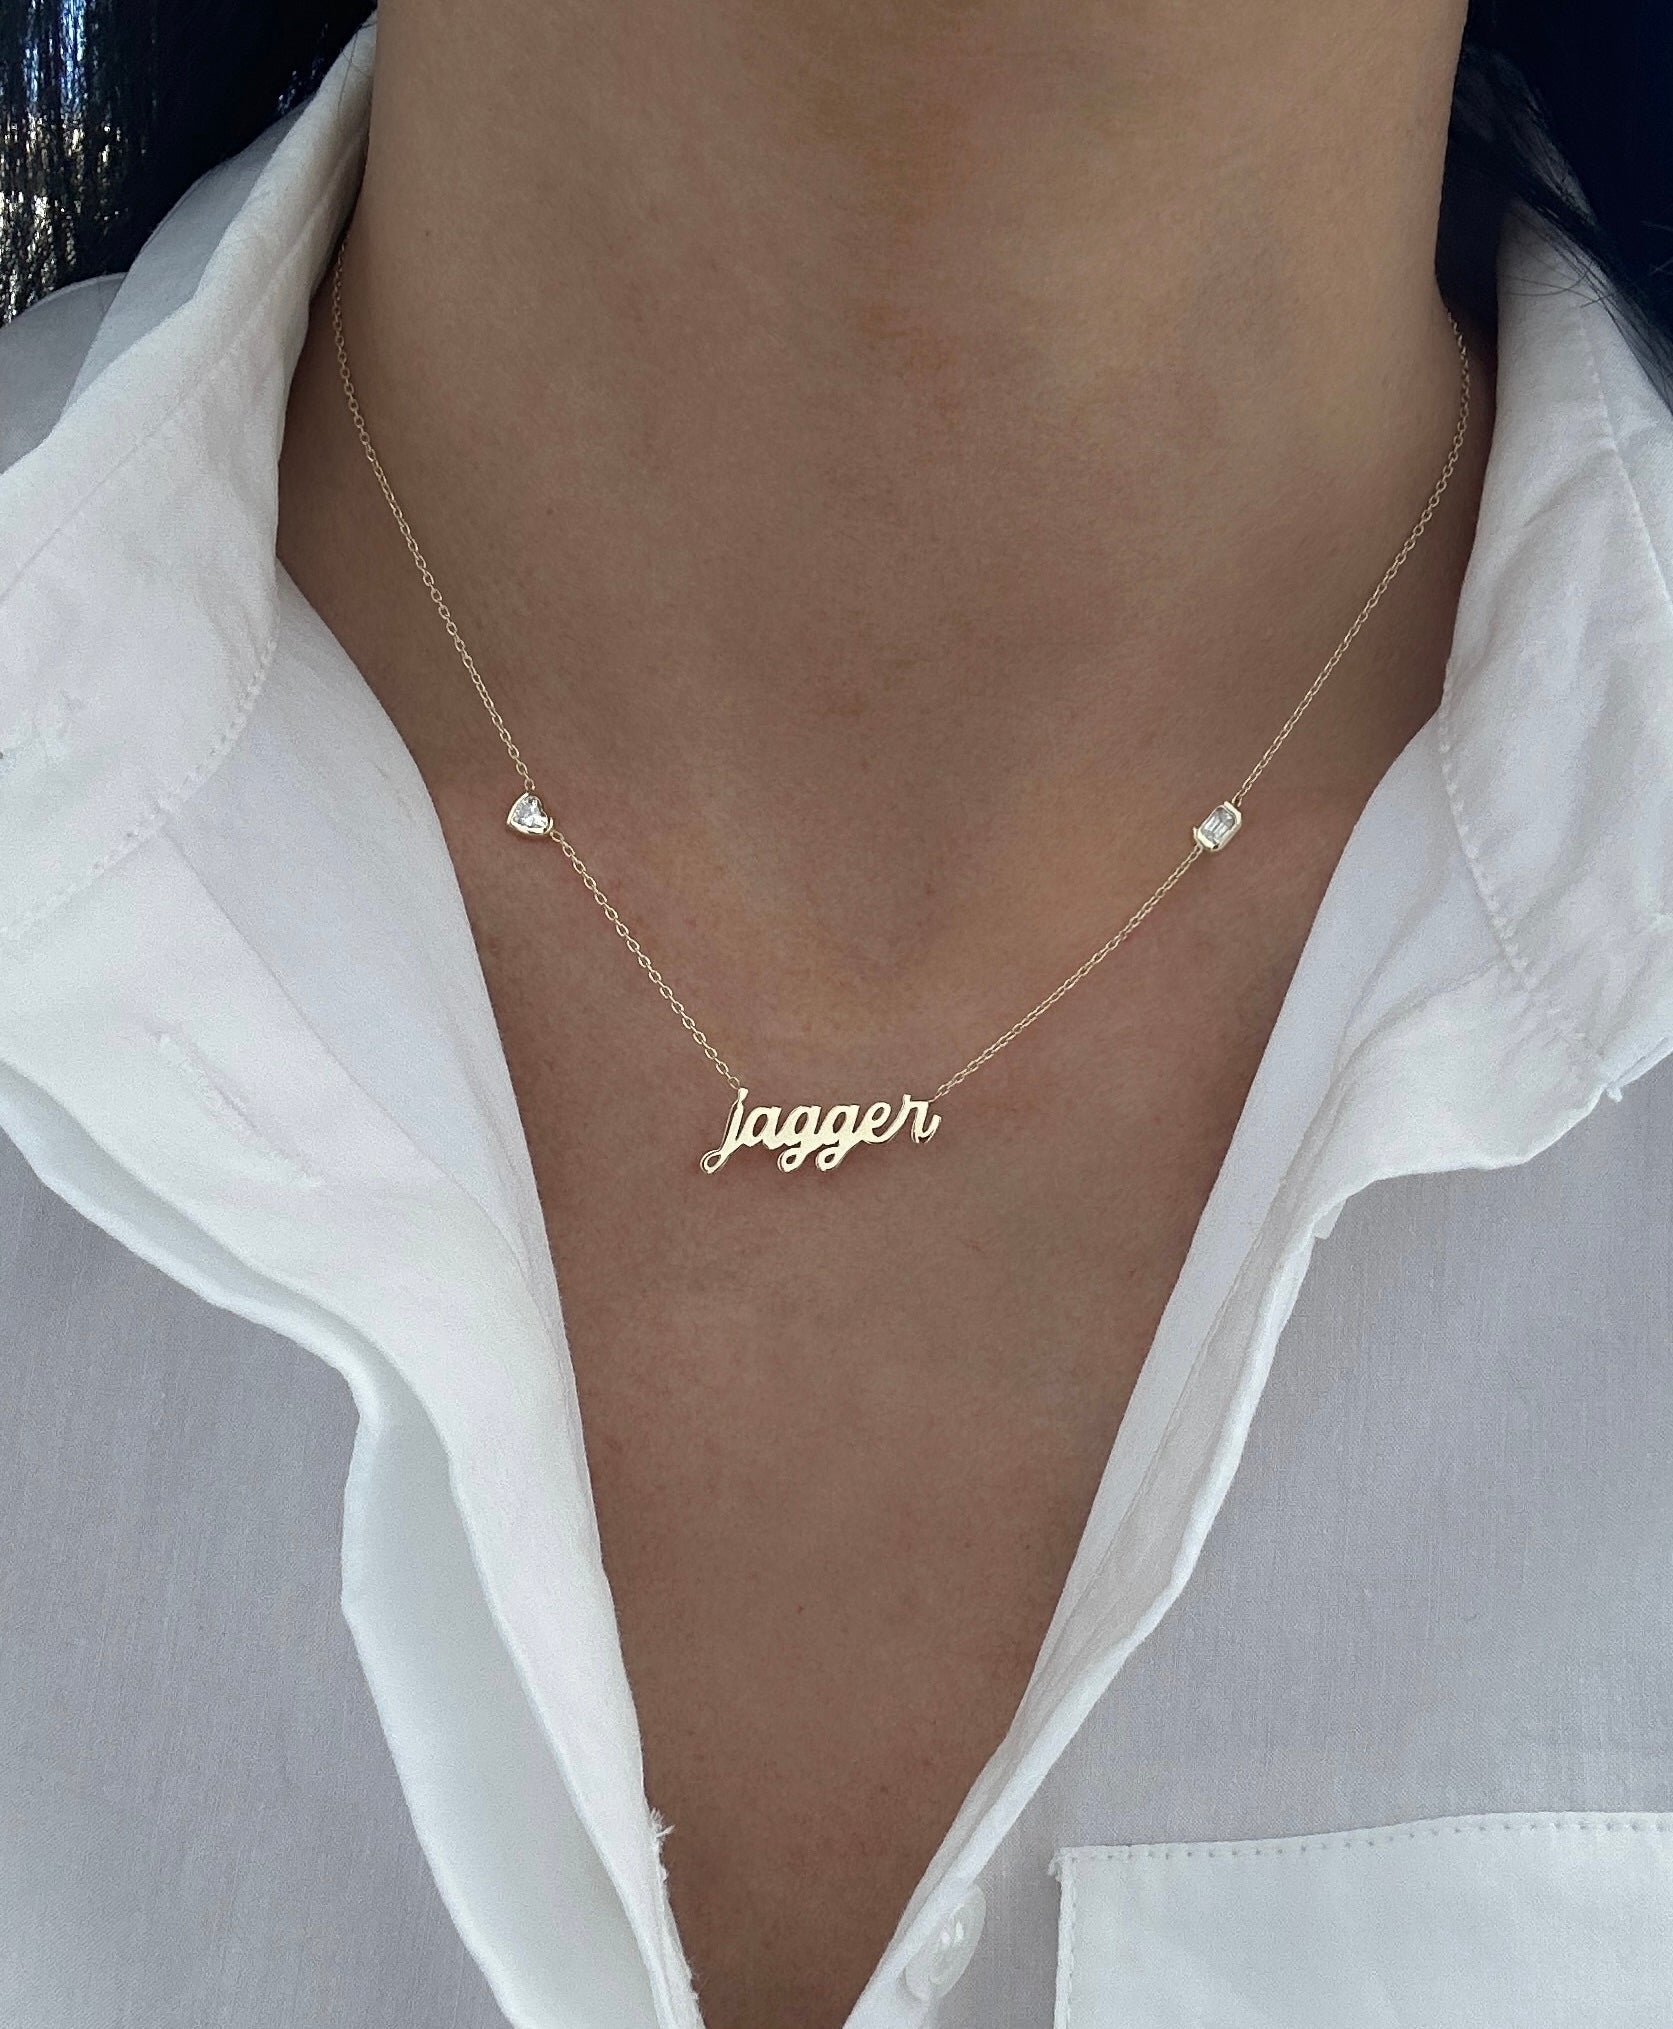 Small Name Necklace with Diamond Accent Stones